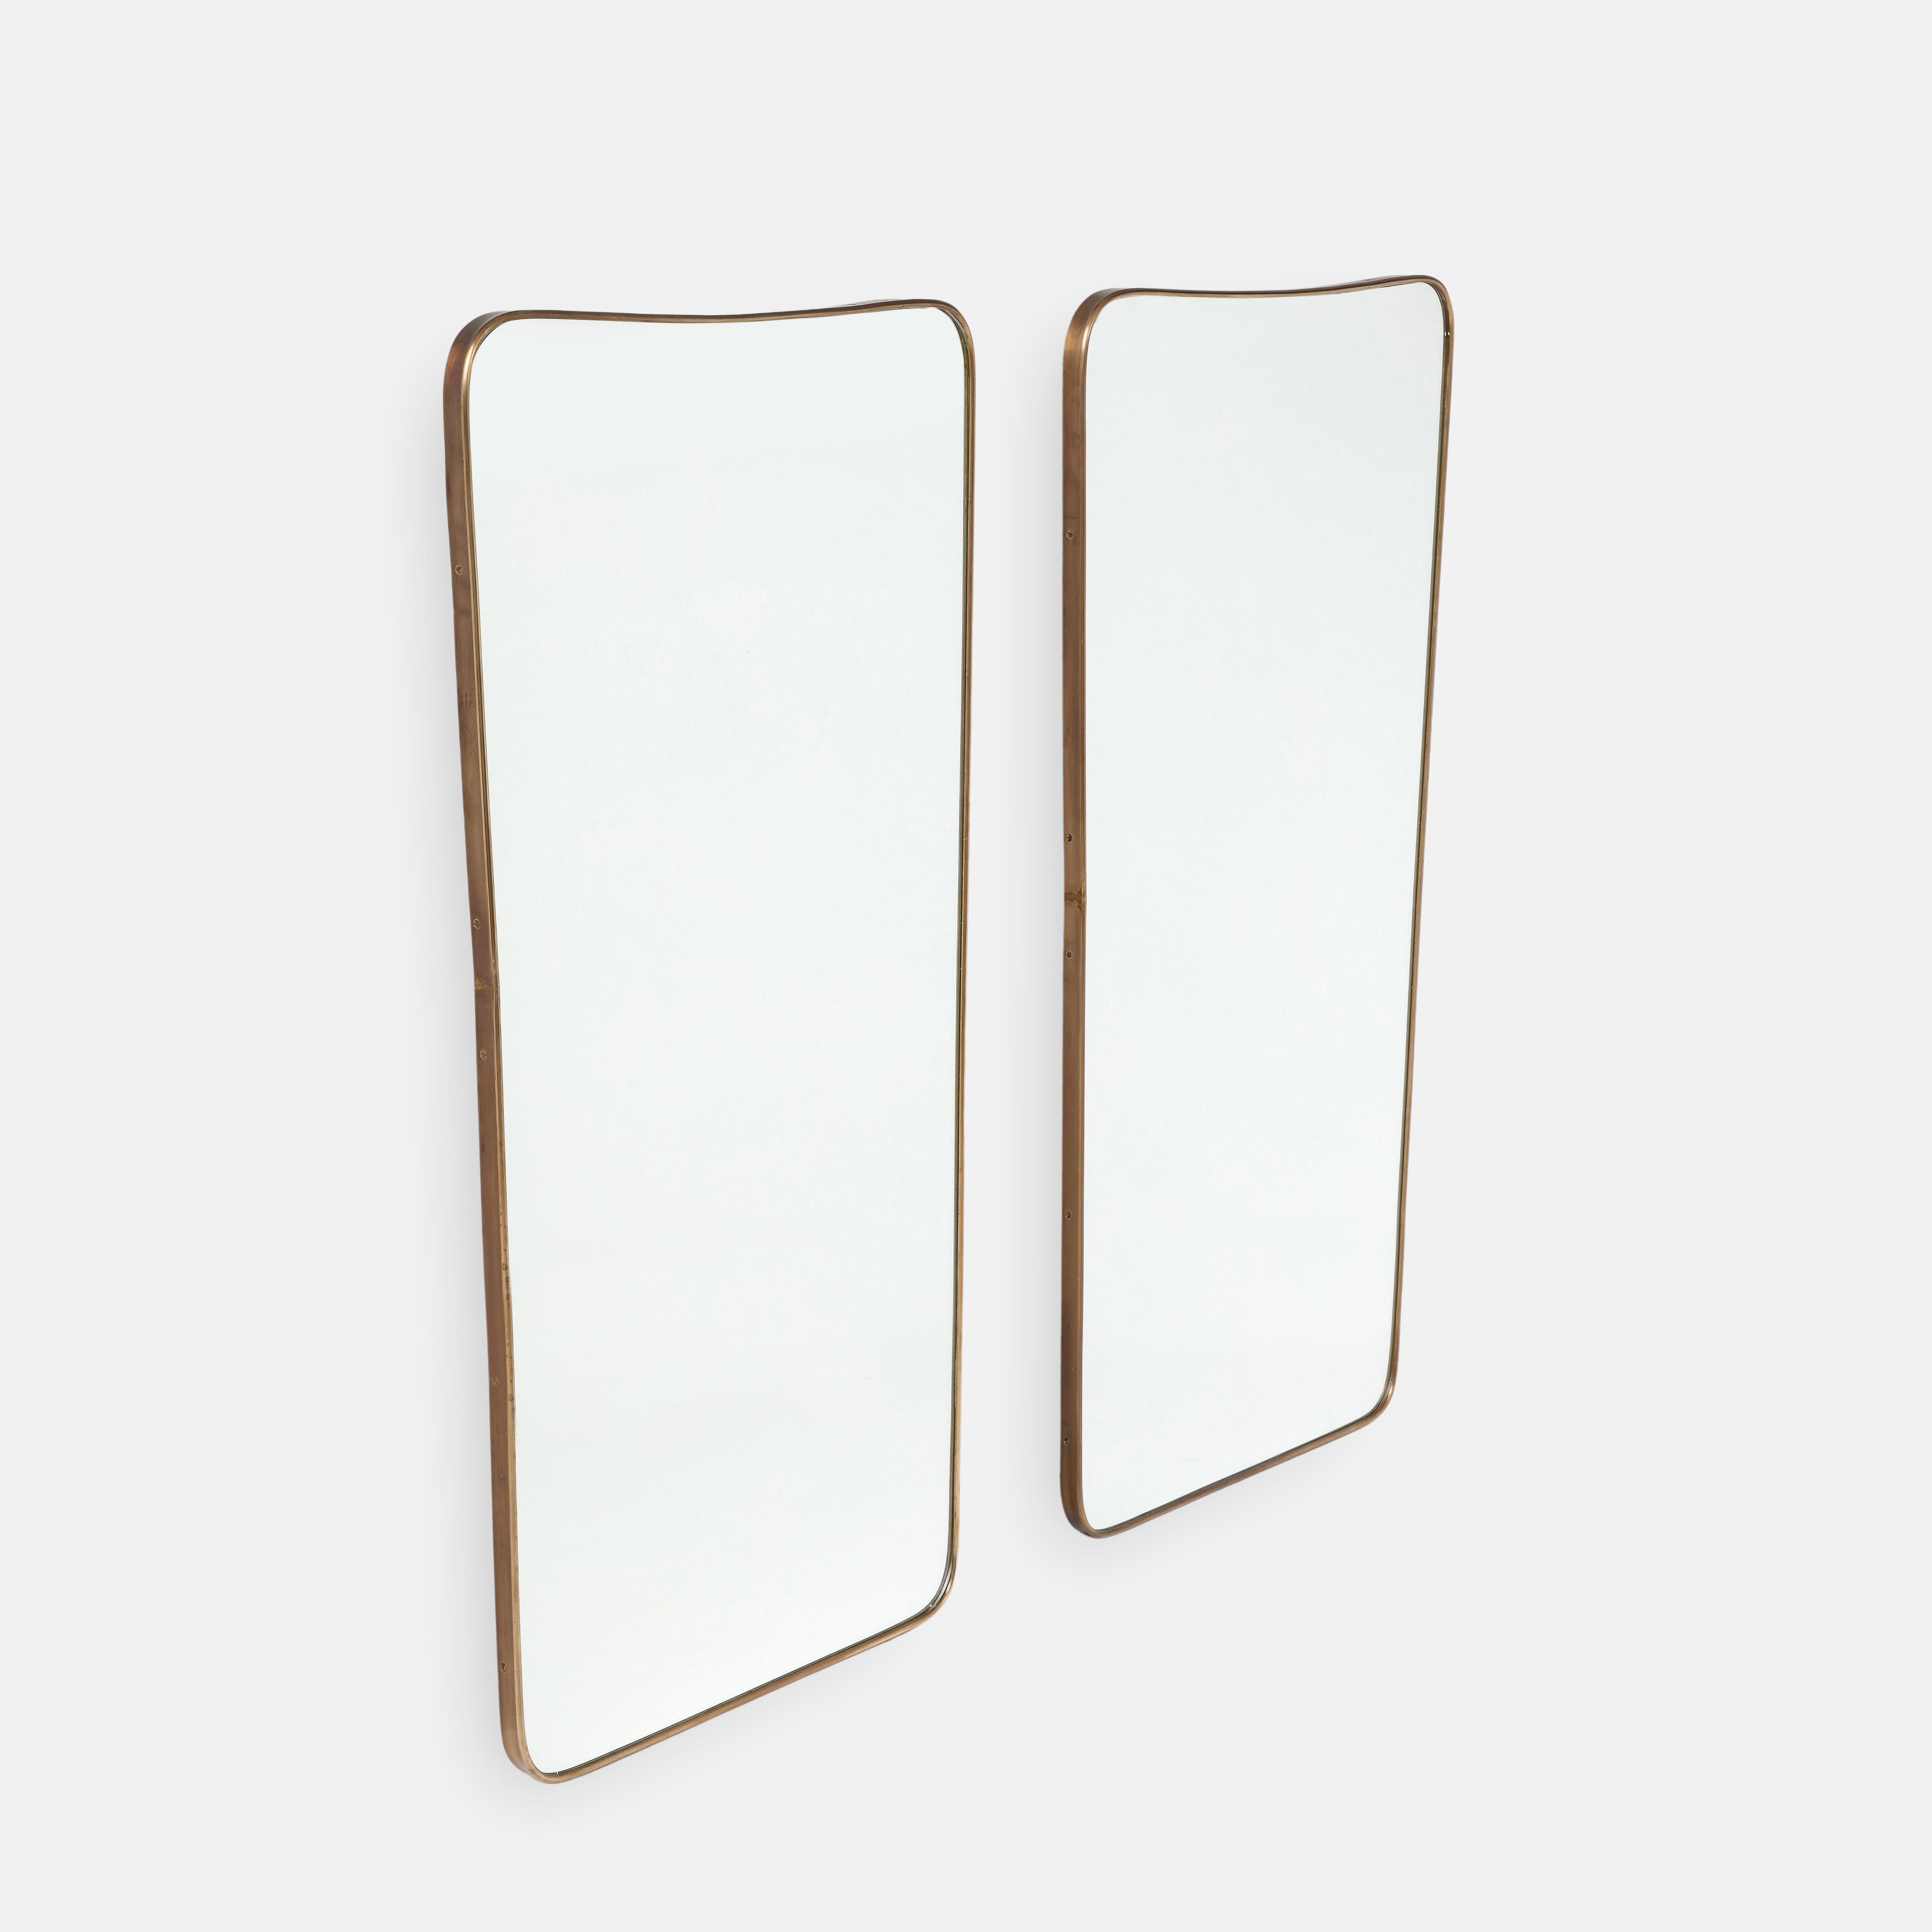 1950s Italian modernist pair of large wall mirrors consisting of shaped brass frames with gently arched tops and rounded corners which taper towards the slightly arched bottoms. These chic pair of mirrors are truly an iconic Italian midcentury brass